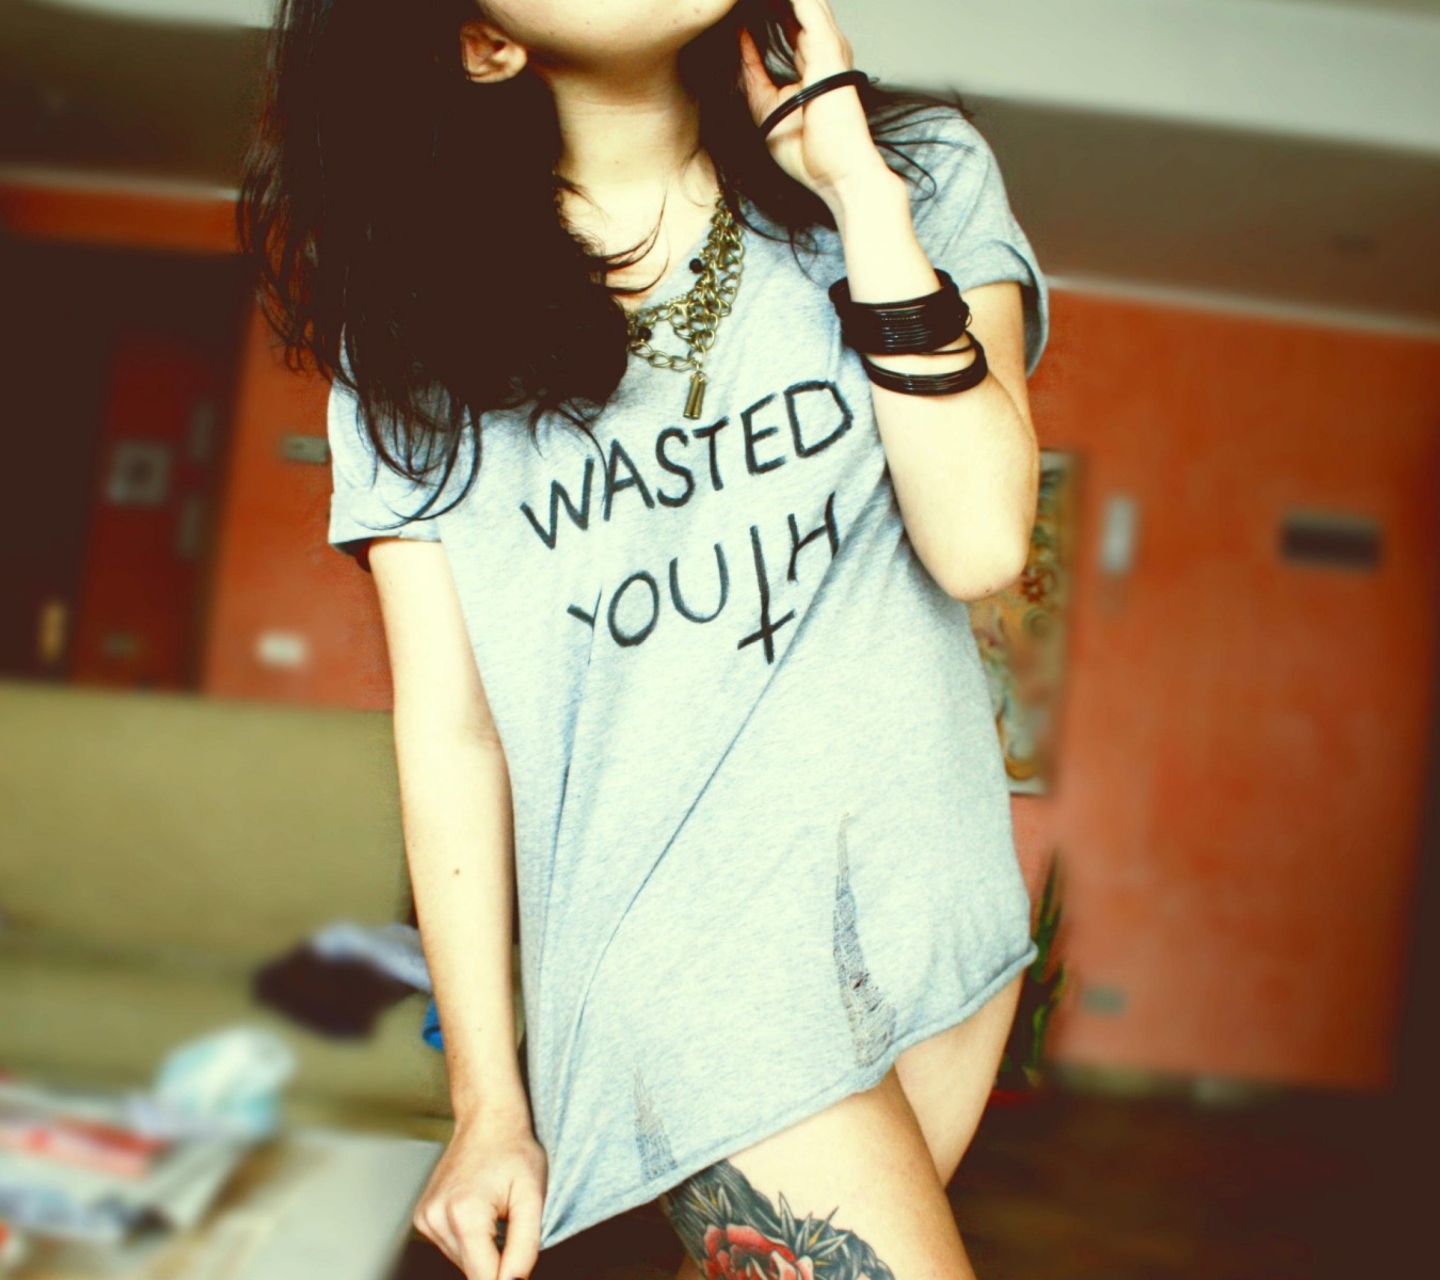 Das Wasted Youth T-Shirt Wallpaper 1440x1280